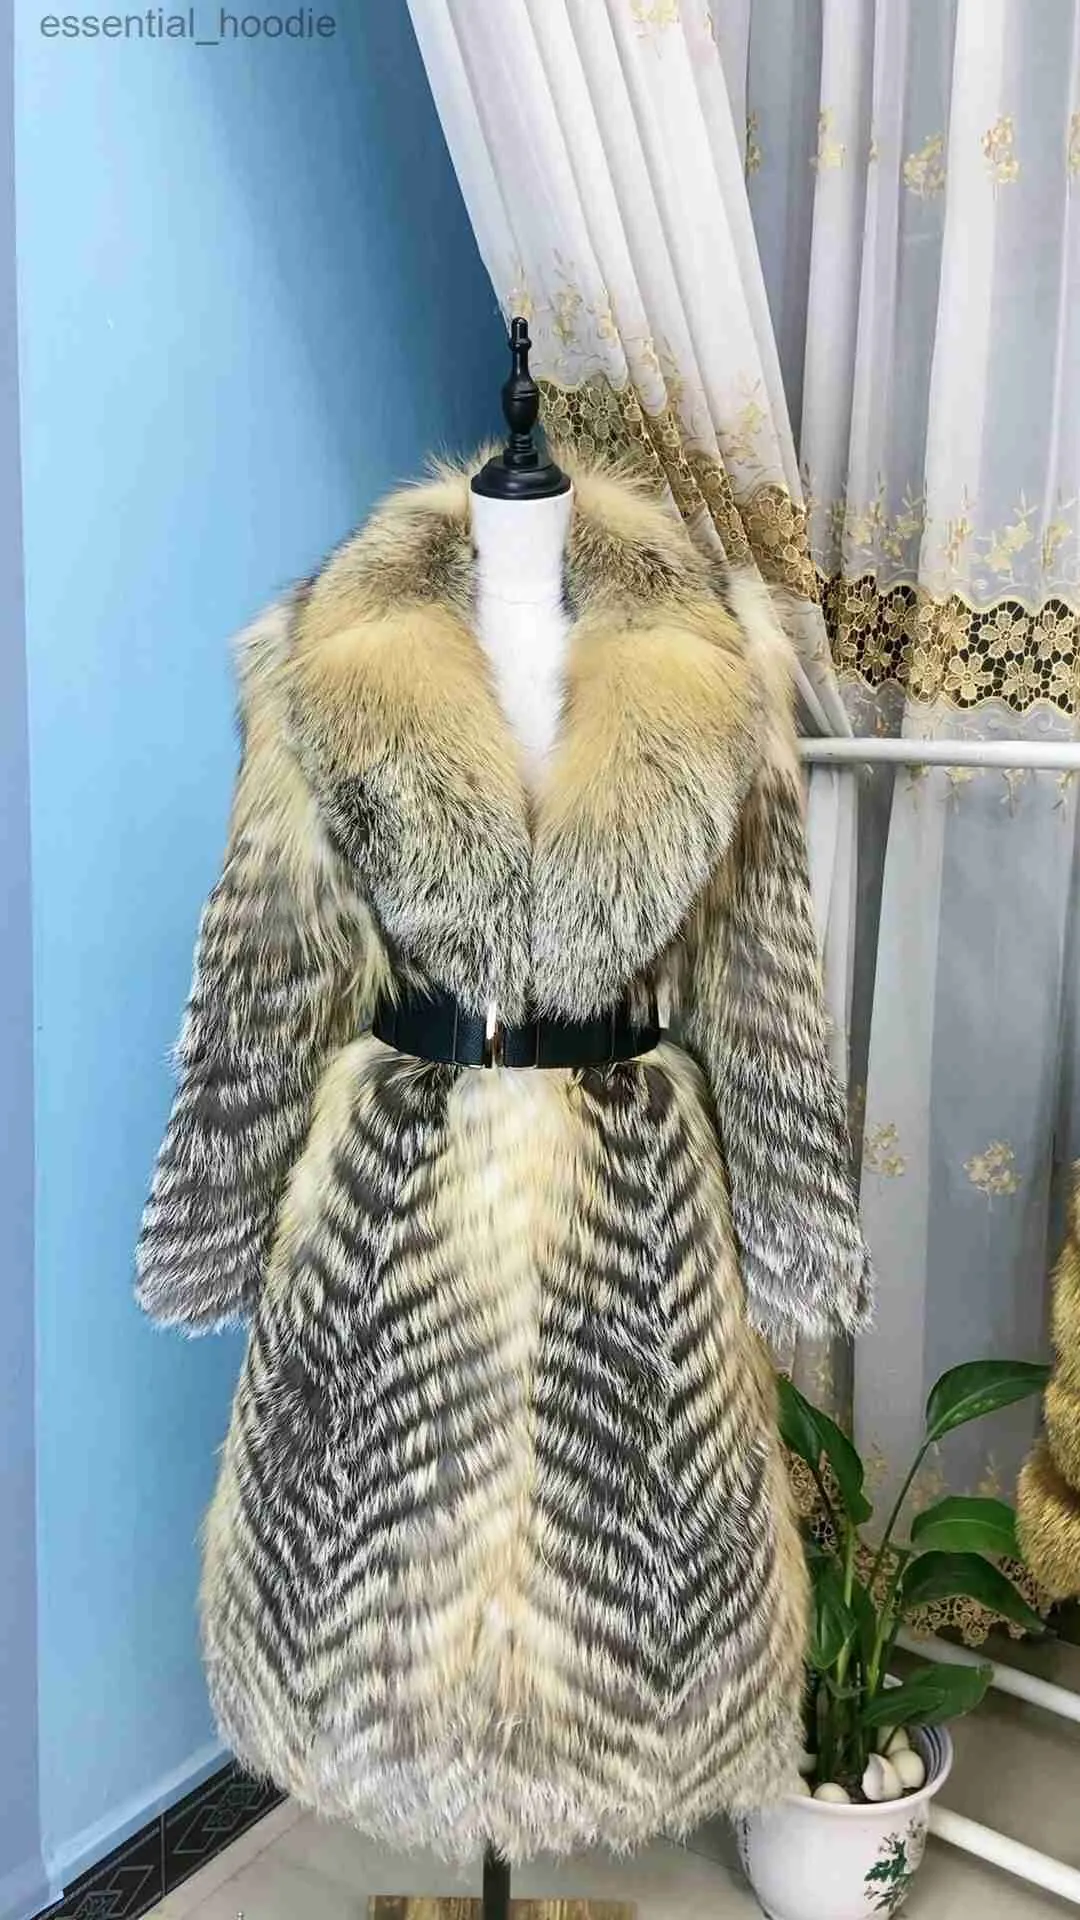 ANNSIRGRA Womens X Long Faux Fur Coats And Jackets With Turn Down Fox Fur  Collar 100% Genuine Real Fox Fox, Warm And Stylish Fashion Overcoat L230920  From Essential_hoodie, $147.46